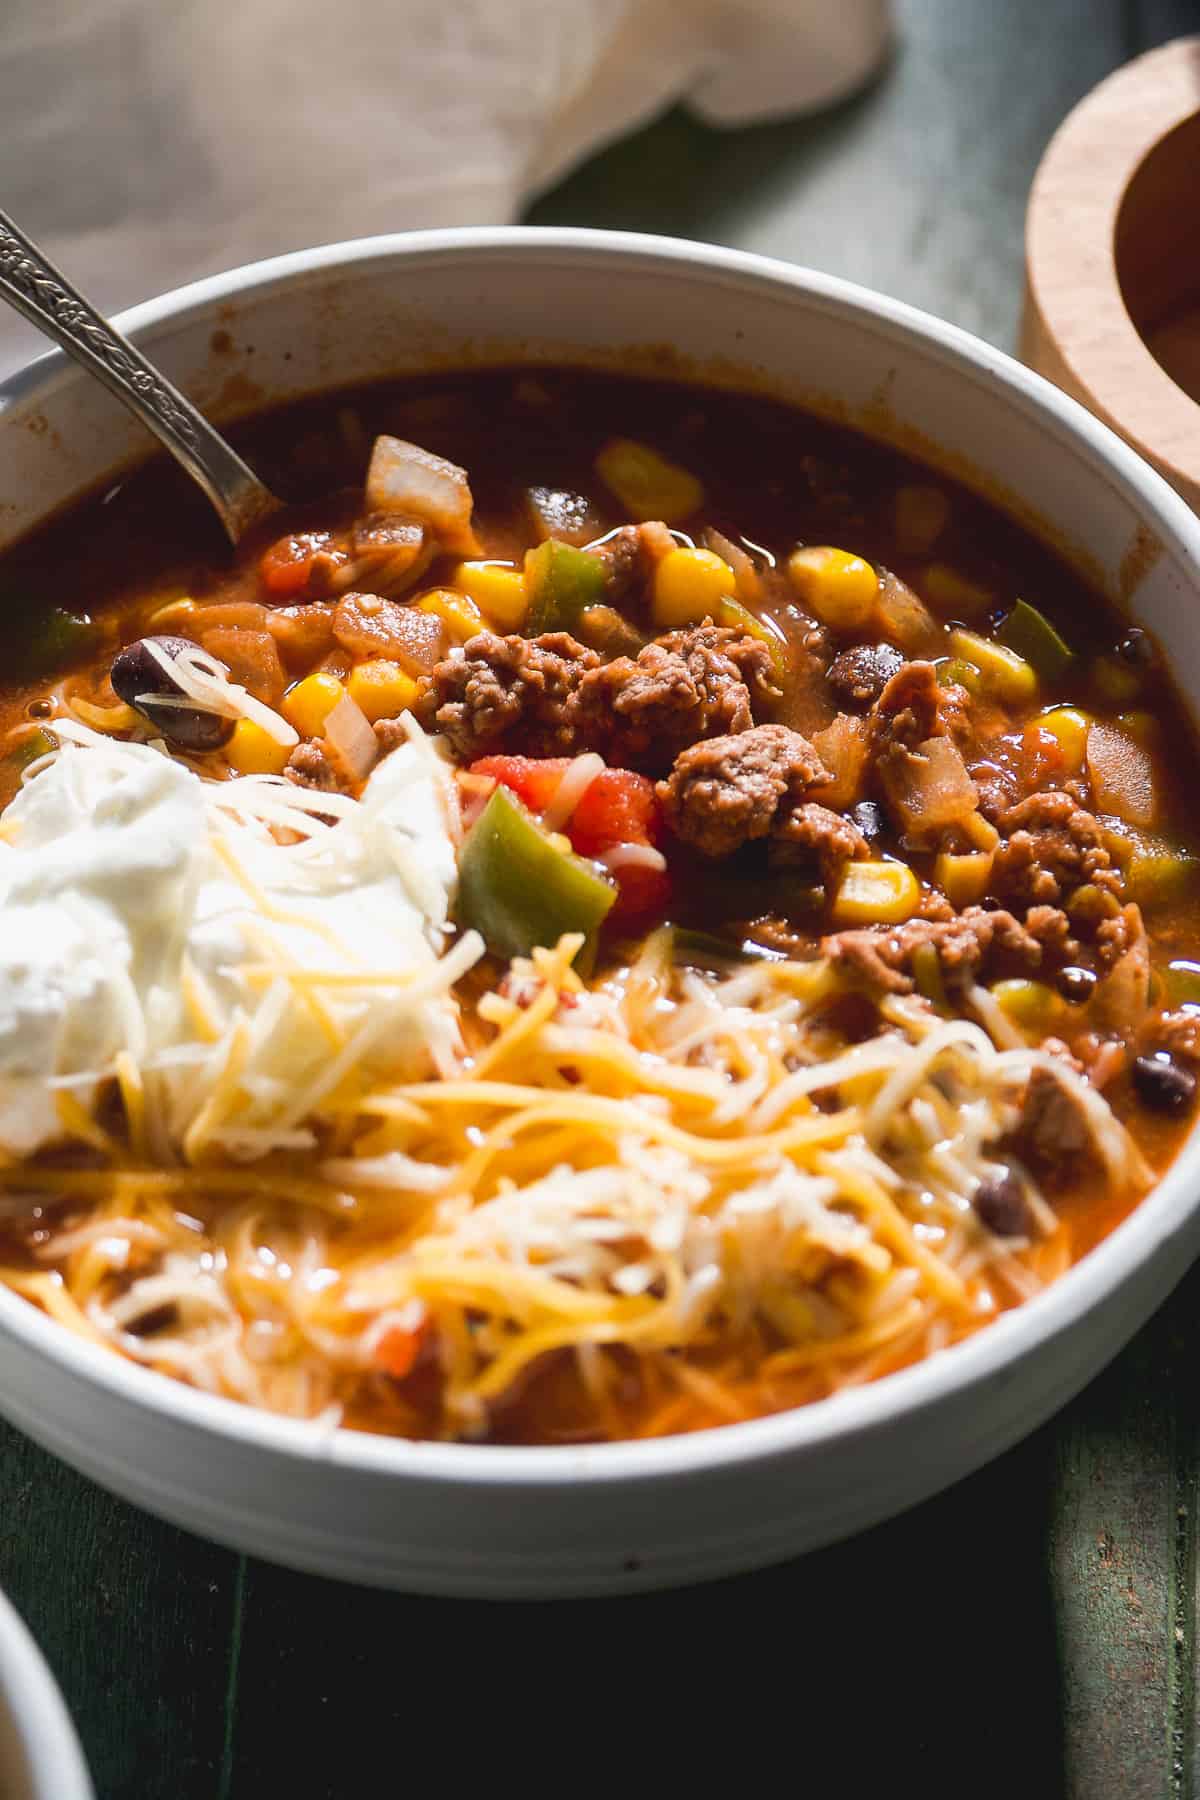 Chili in a bowl with cheese and yogurt.